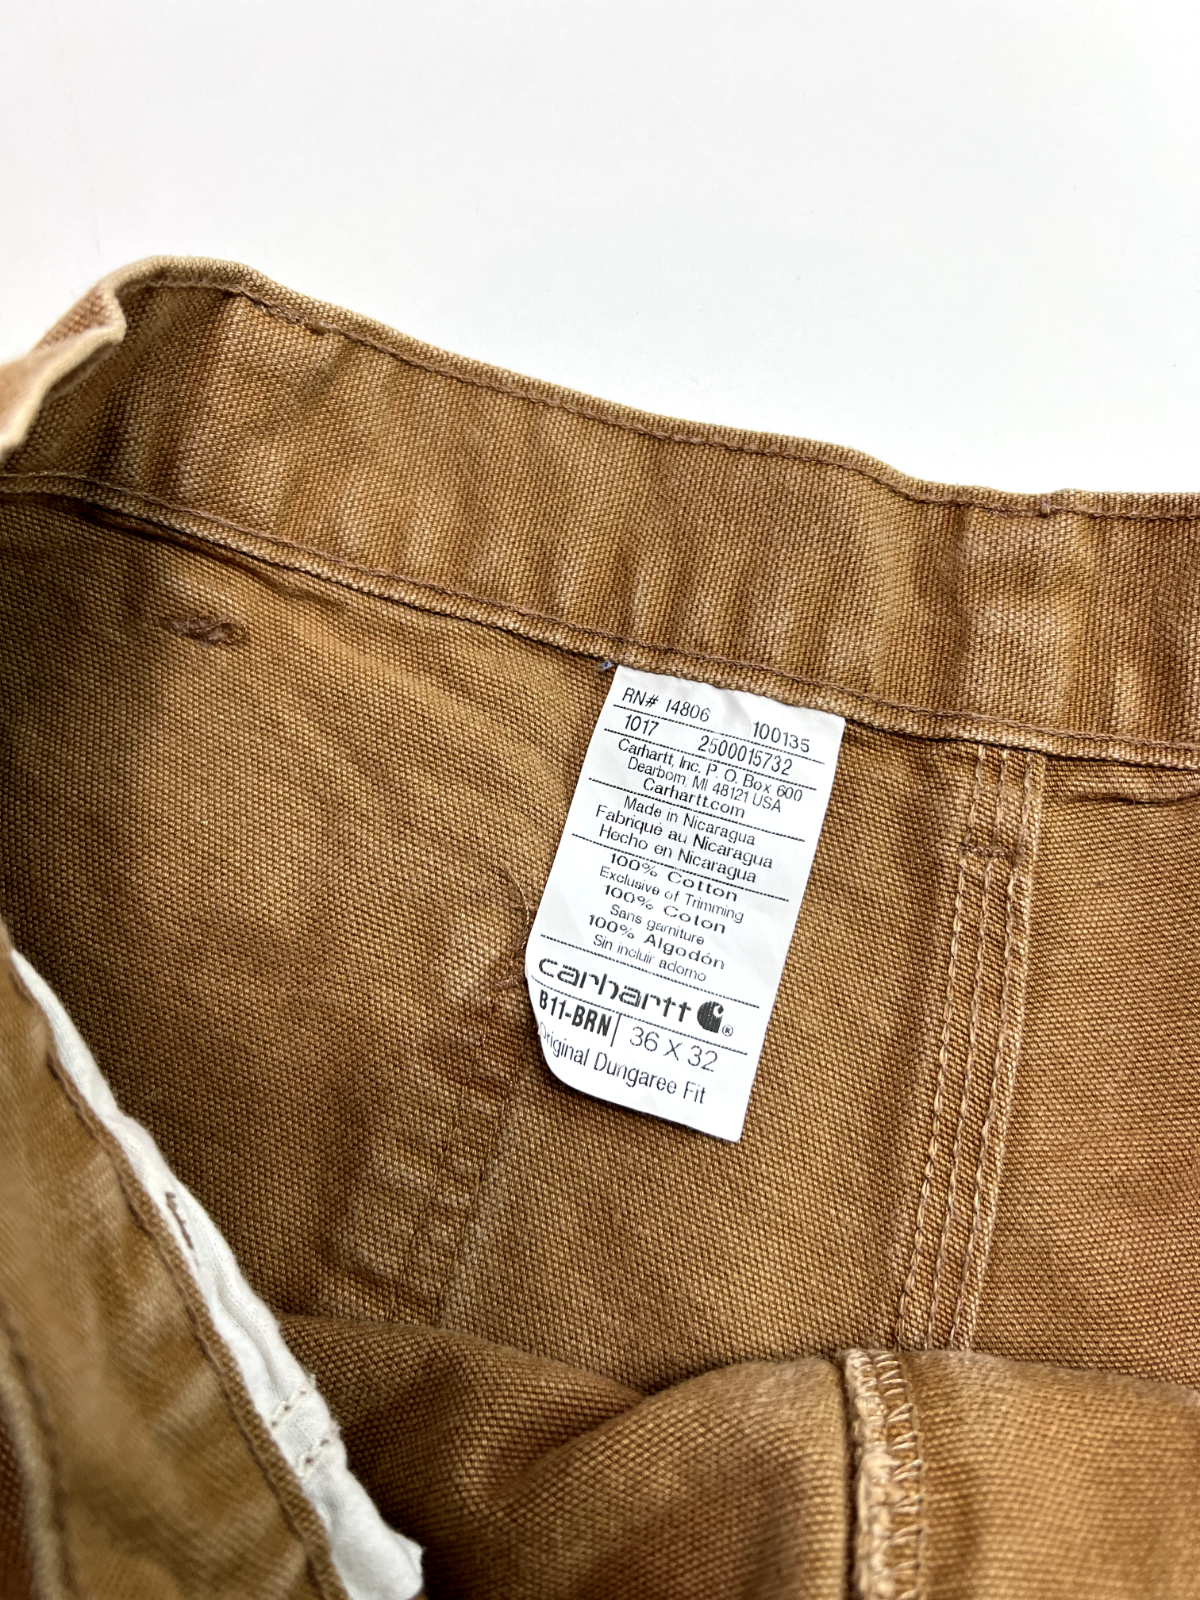 Vintage Carhartt Carpenter Canvas Workwear Dungaree Fit Pants Size 34W Brown